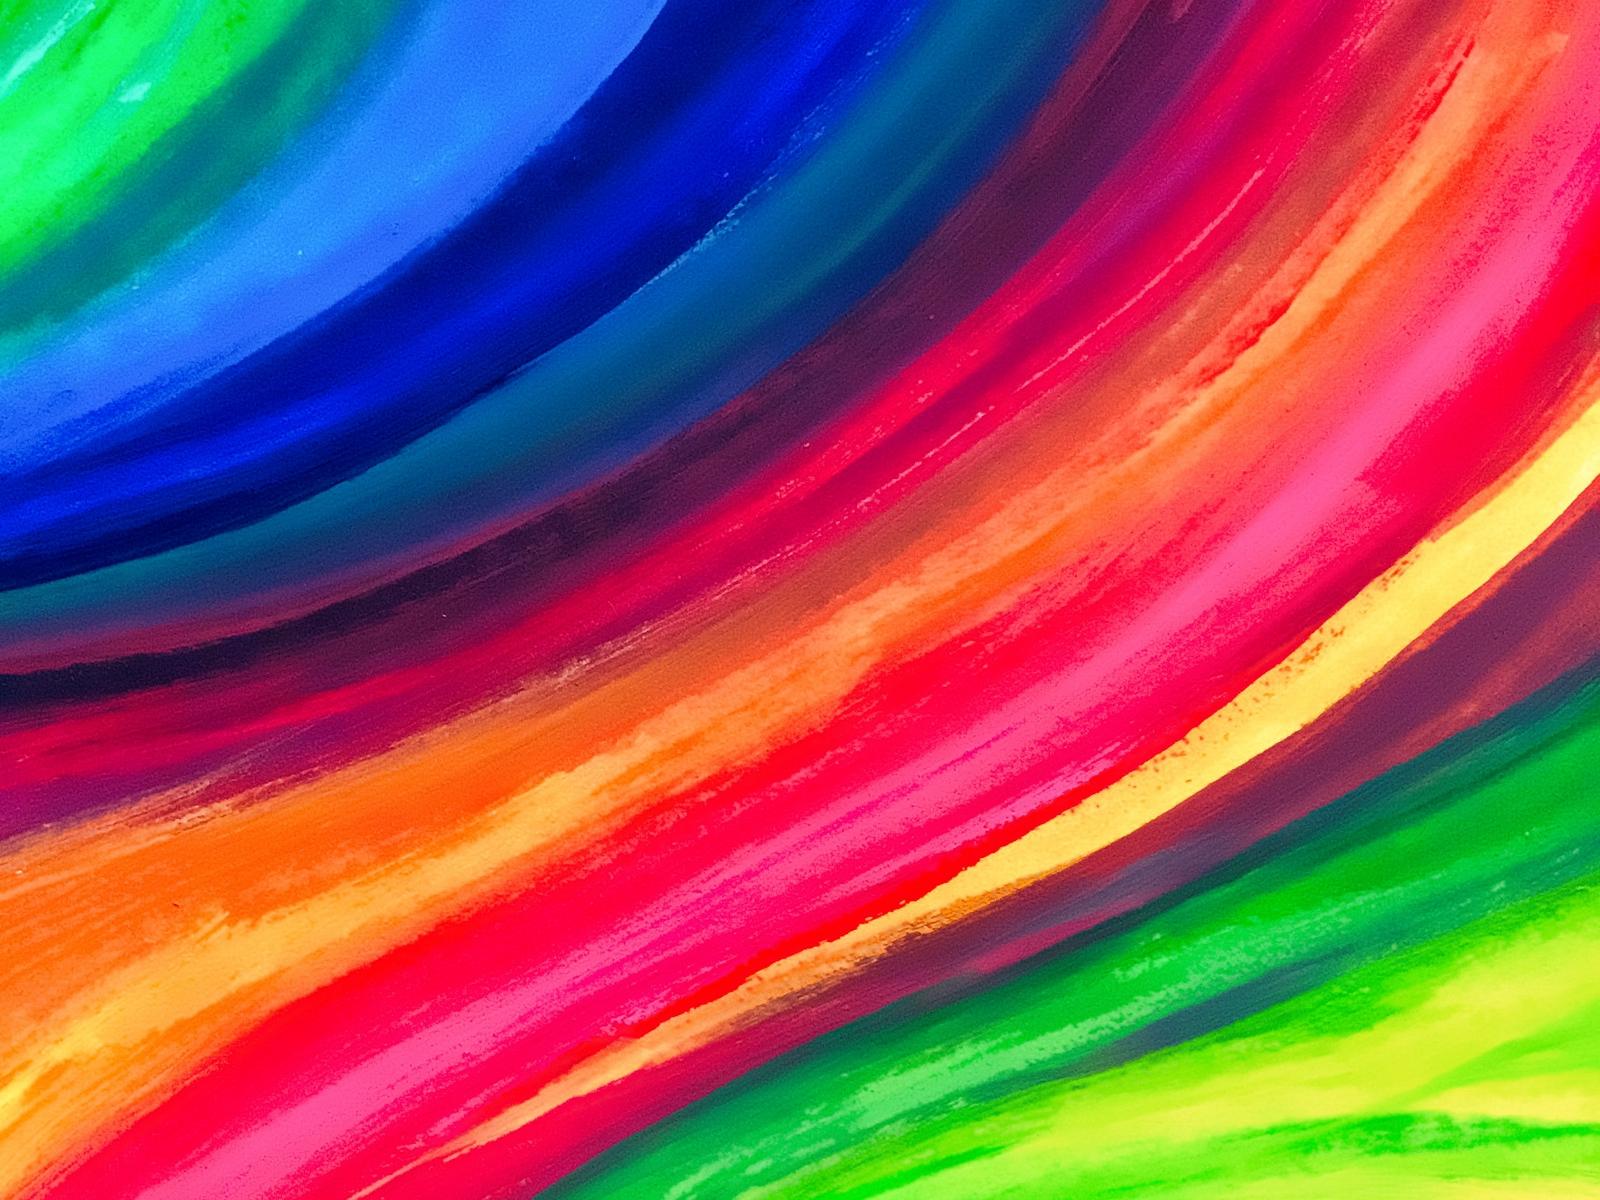 Download wallpaper 1600x1200 iridescent, colorful, lines